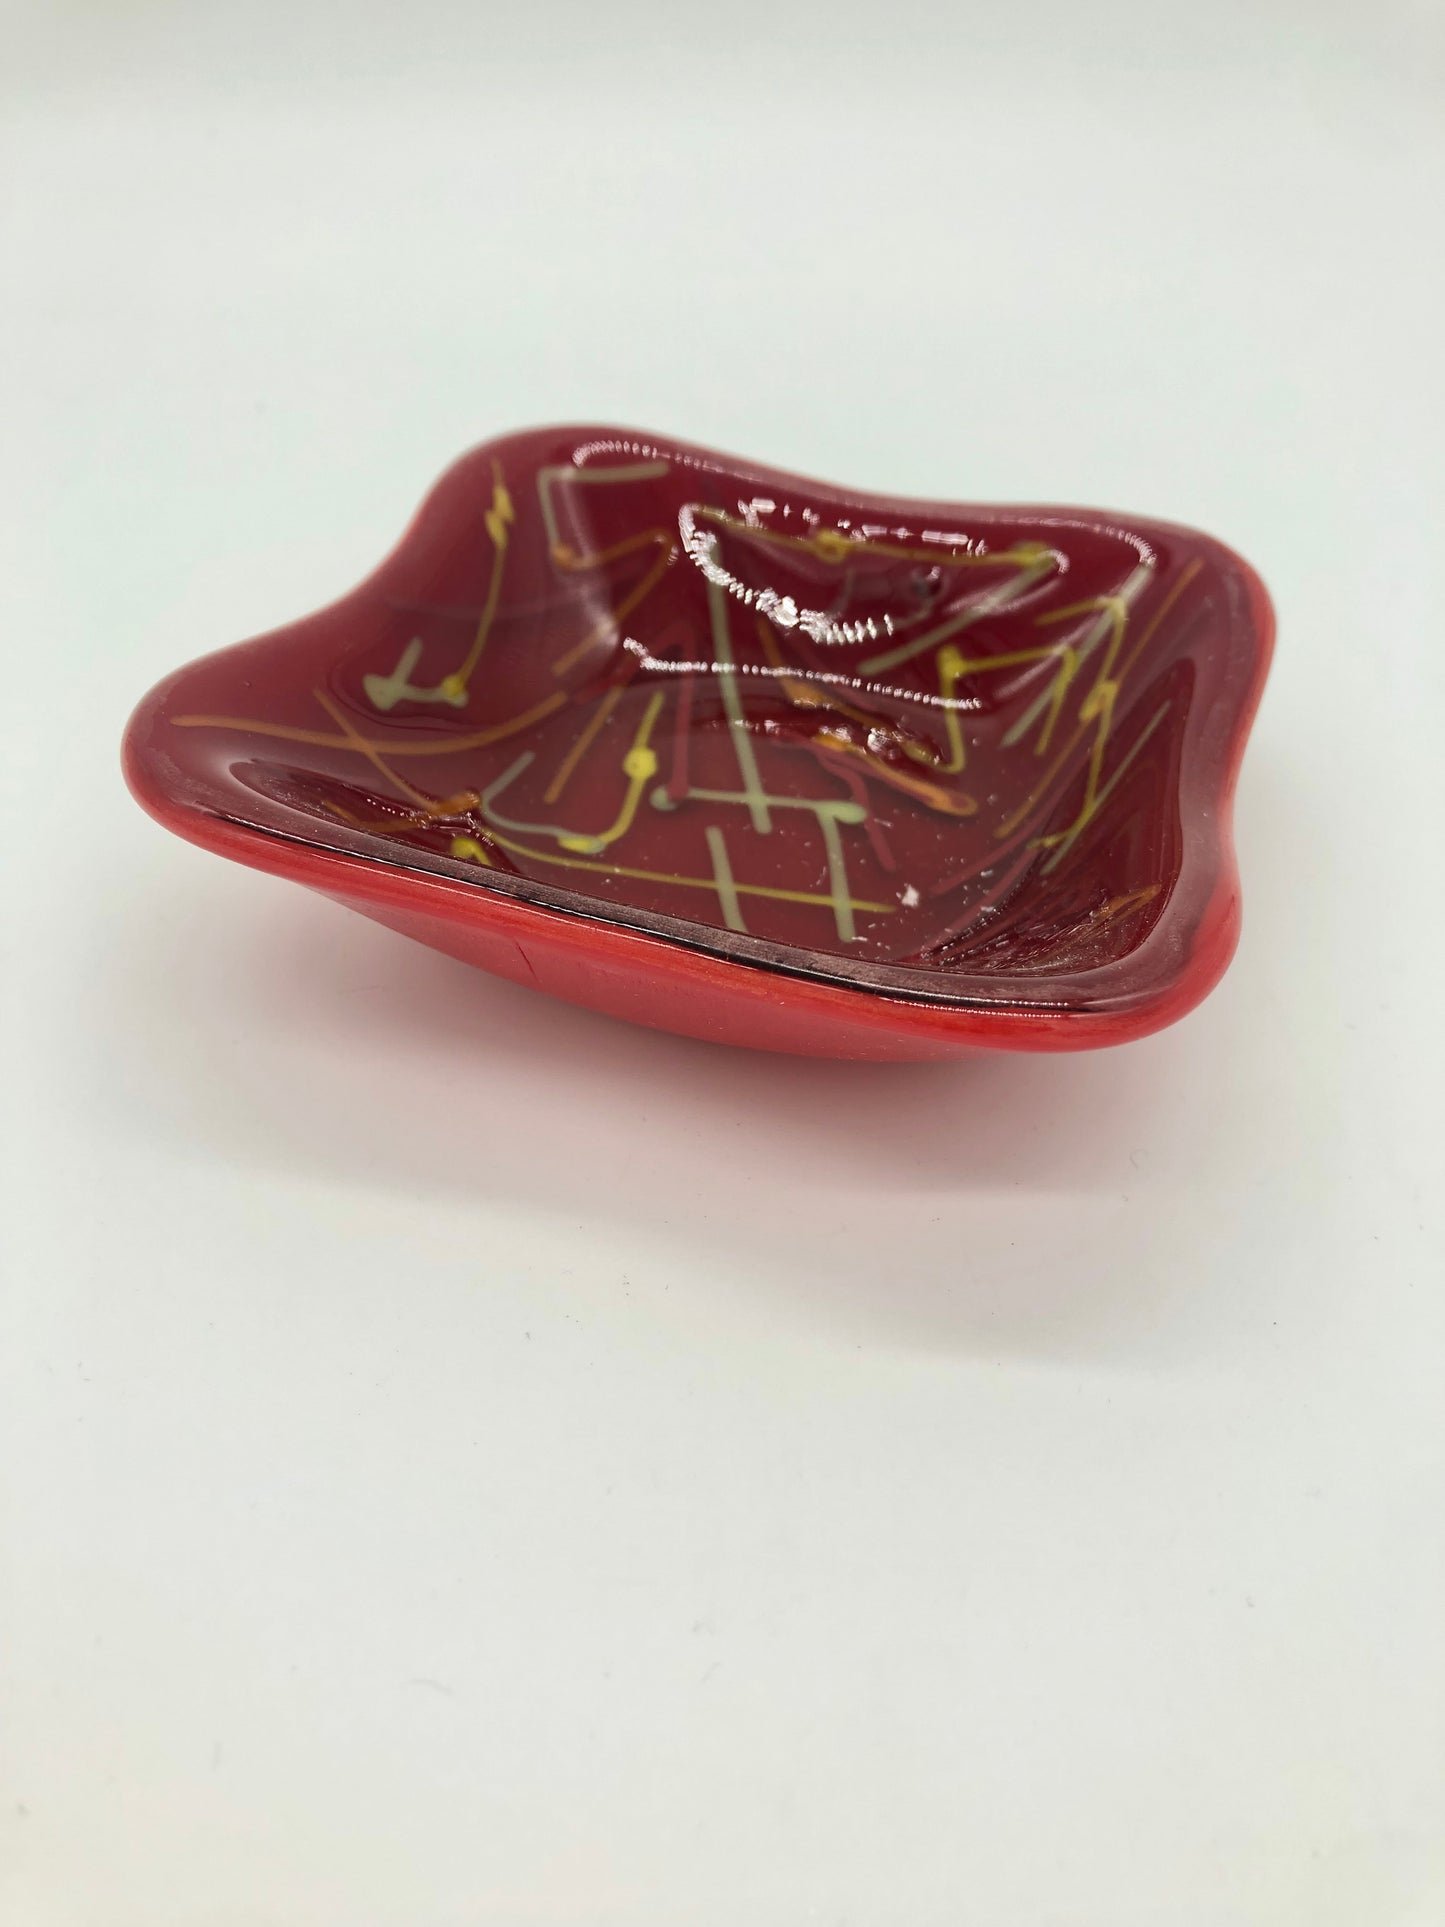 Deep Square Bowl - Maroon on Red